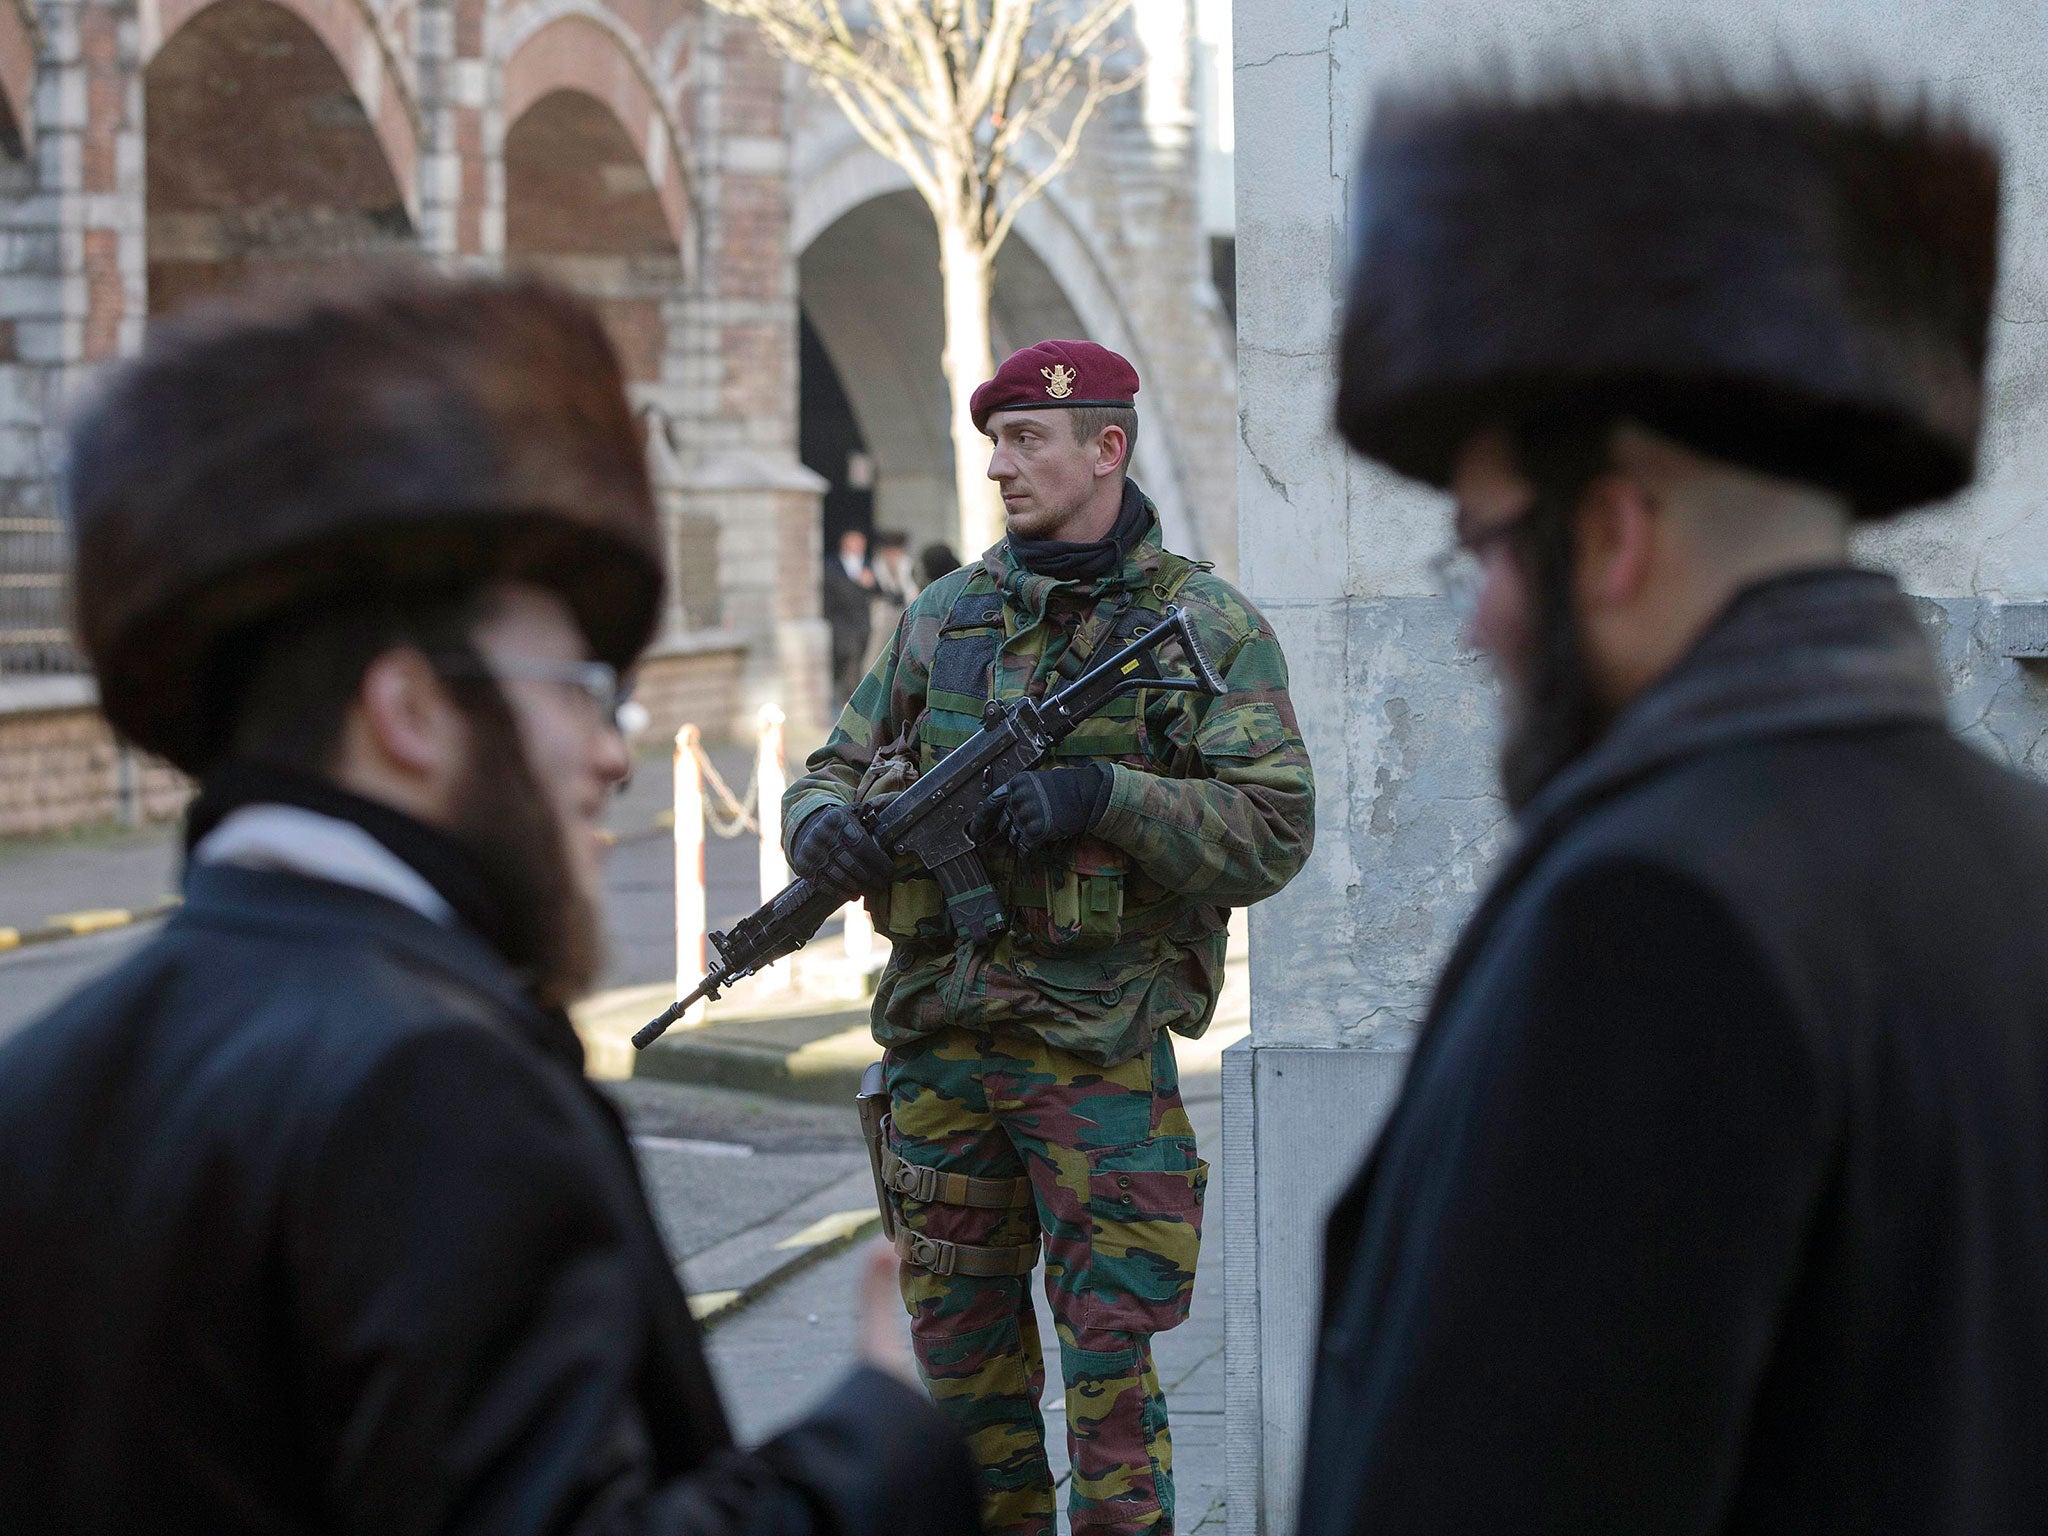 A Belgian paratrooper guards a Jewish school in Antwerp at the weekend, as security was tightened in major Belgium towns following the foiled terror plot in Verviers